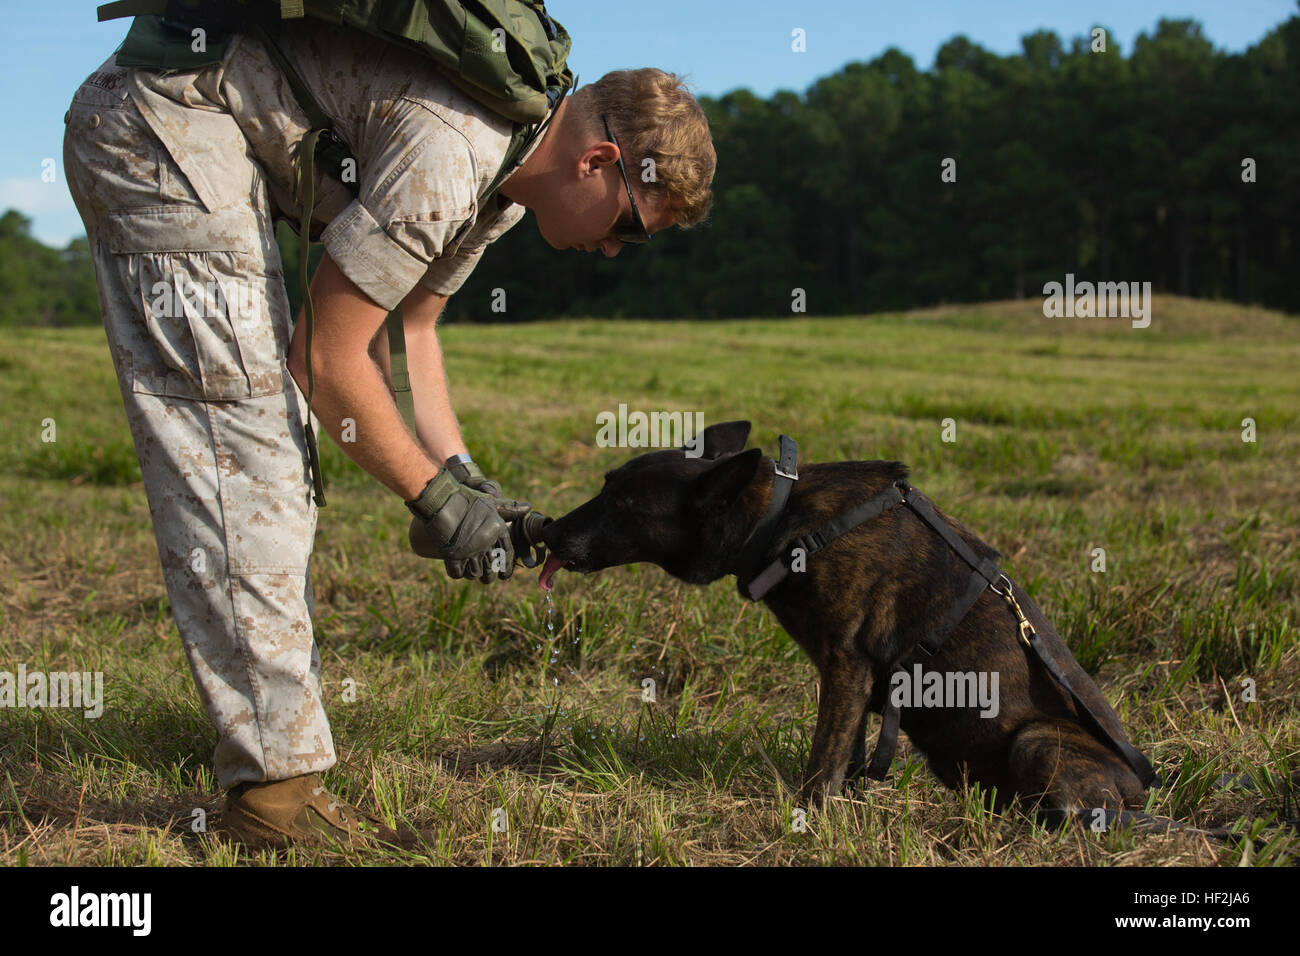 Cpl. Dustin Rollins, a combat tracker with Military Working Dog Platoon, 2nd Law Enforcement Battalion, II Marine Expeditionary Force Headquarters Group, gives his dog Nicky a drink from his canteen aboard Marine Corps Base Camp Lejeune, N.C., Oct. 9, 2014. The dog had successfully tracked the scent of a Marine during tracker and patrol training. Rollins is from Richmond, Ky. (U.S. Marine Corps photo by Lance Cpl. Lucas J. Hopkins/Released) Unleashed, Military Working Dogs, handlers build relationship 141009-M-TR086-155 Stock Photo